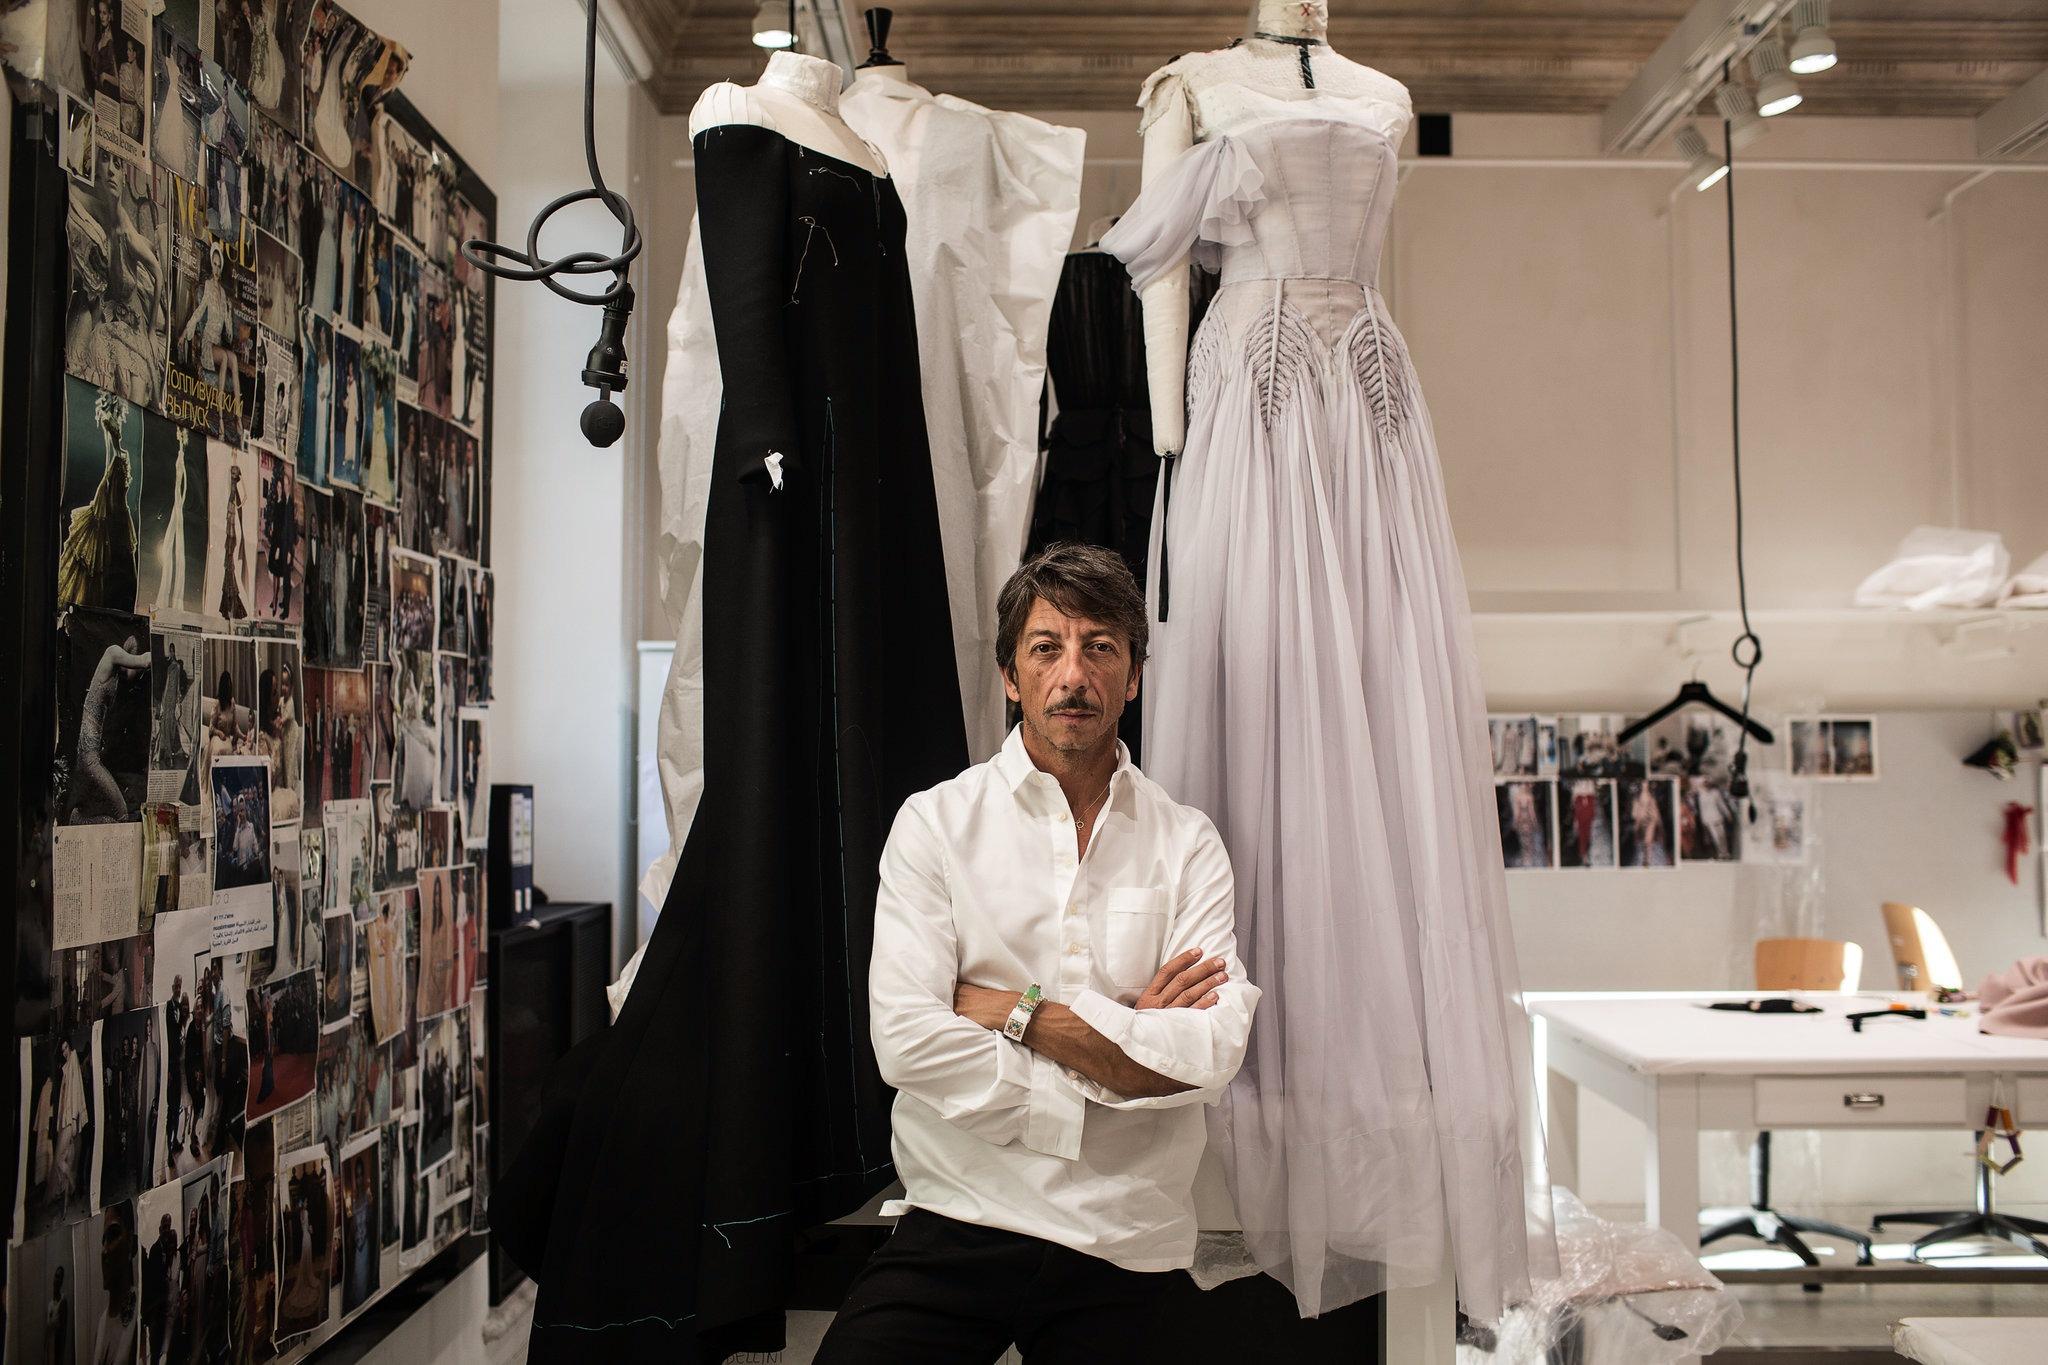 After 25 years of dedication, Pierpaolo Piccioli steps down from the Valentino dynasty